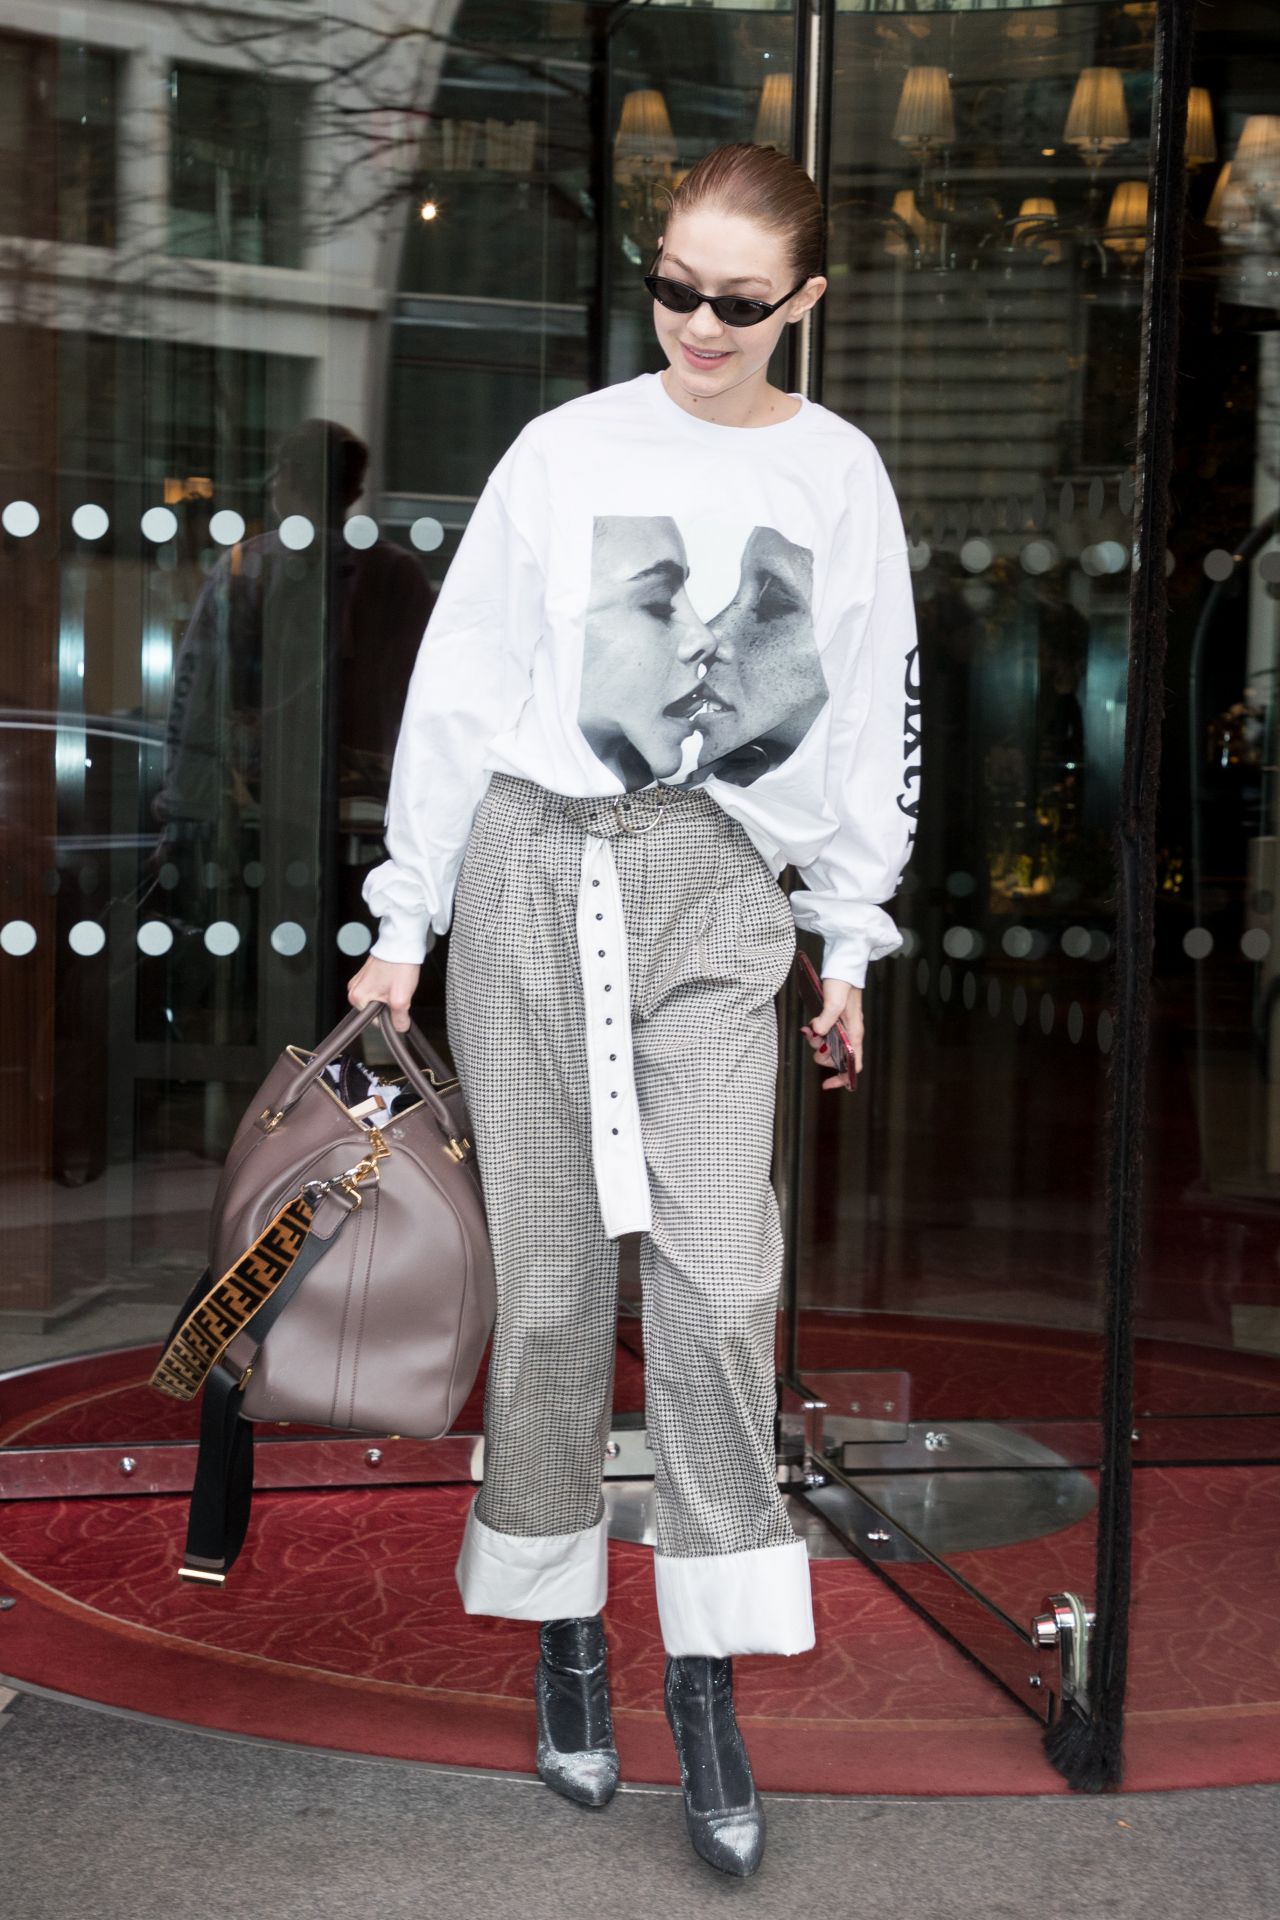 Gigi Hadid Style - Leaving the Royal Monceau Hotel in Paris 03/29/2018 ...